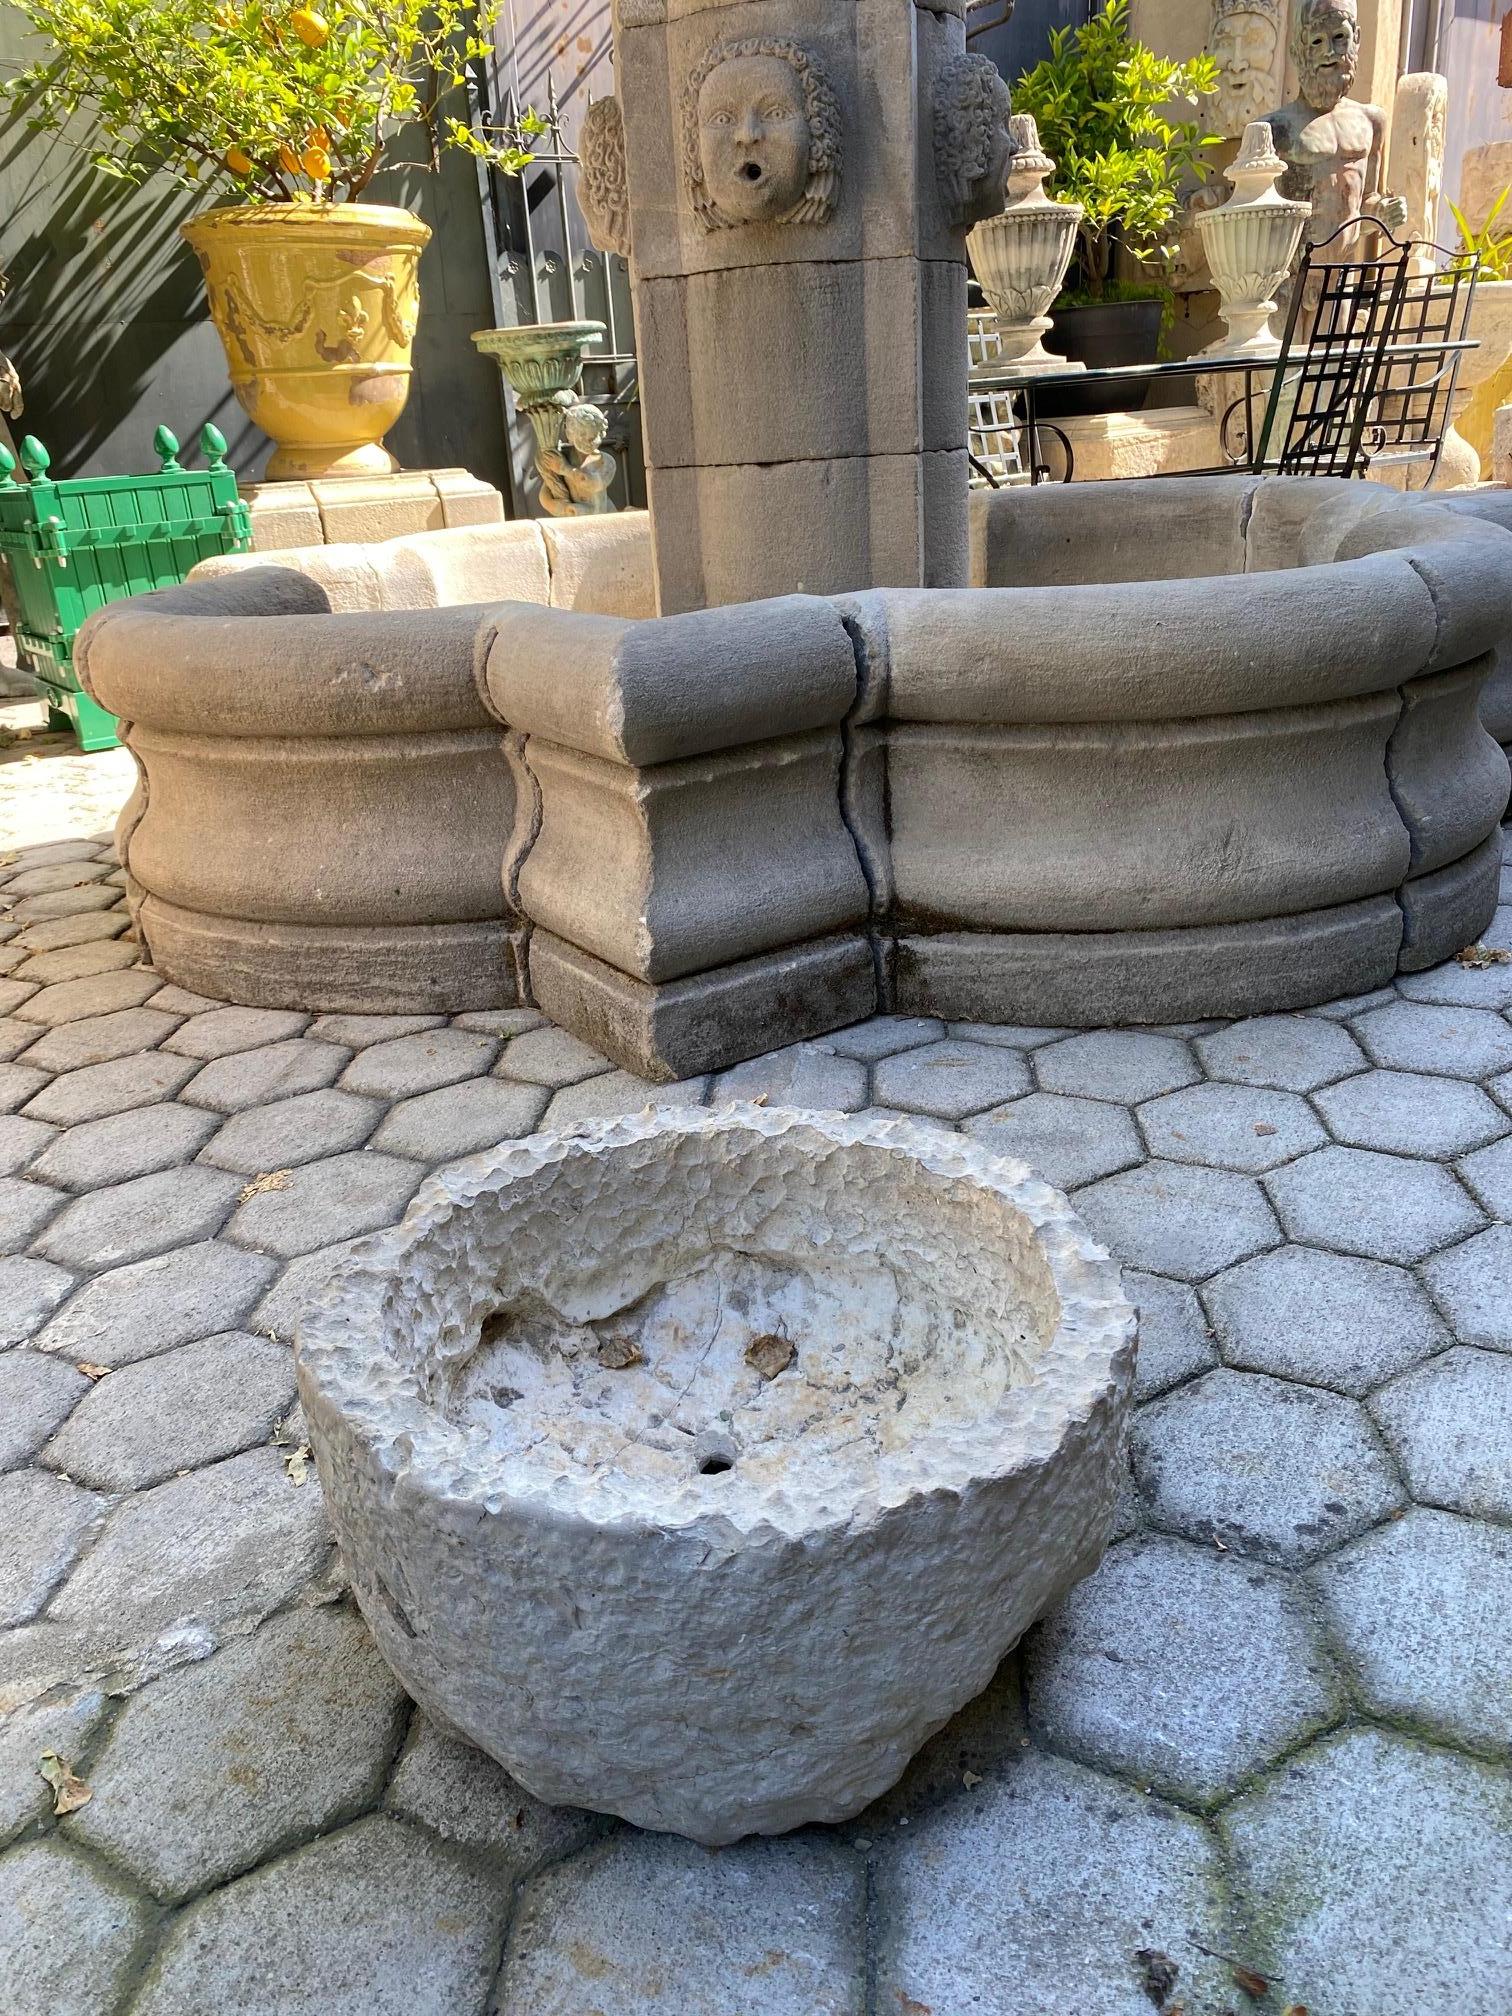 A beautiful 18th century hand carved stone container basin having a nicely textured surface and patina. It could be standing alone as a decorative object or used as a planter indoor outdoor. This antique stone vessel mortar planter has a lot of